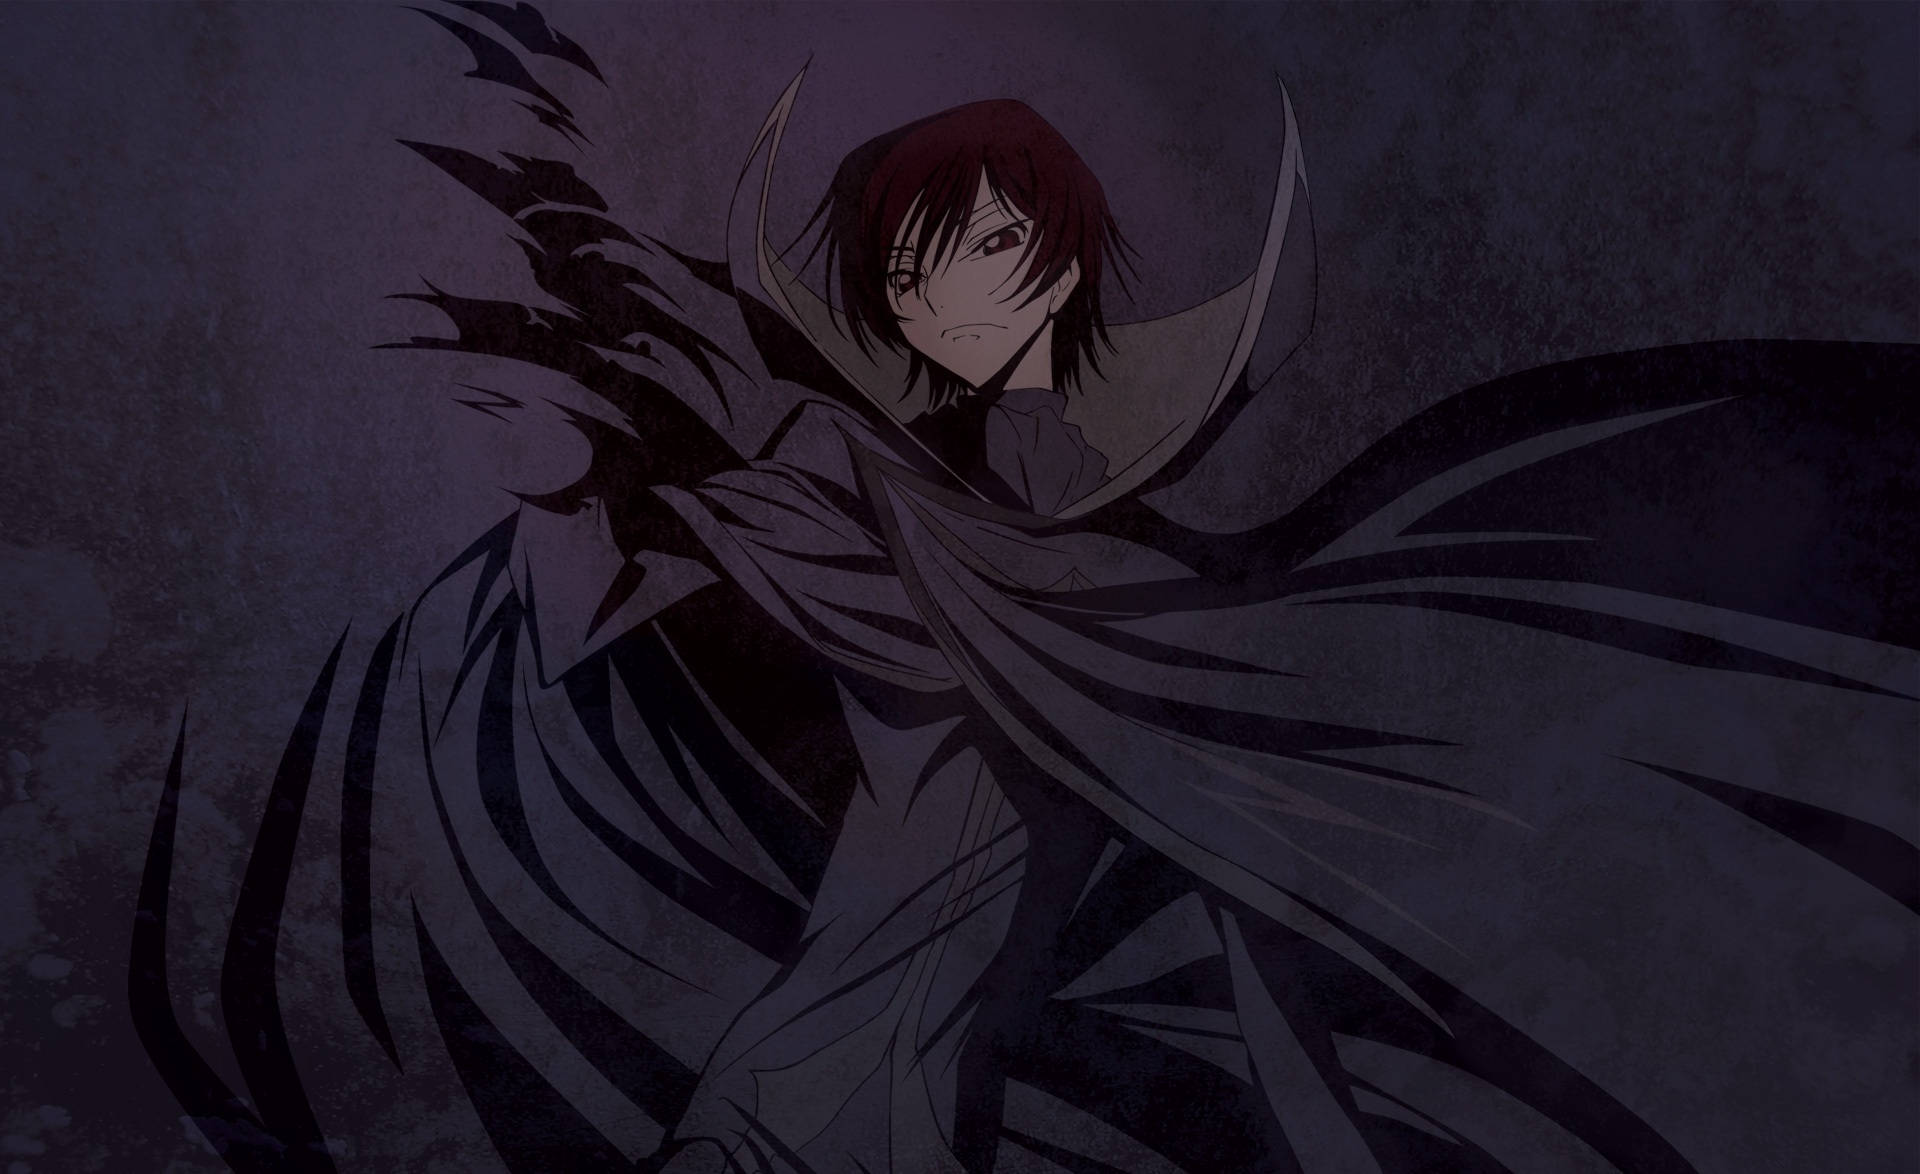 Top 999+ Lelouch Lamperouge Wallpapers Full HD, 4K✅Free to Use